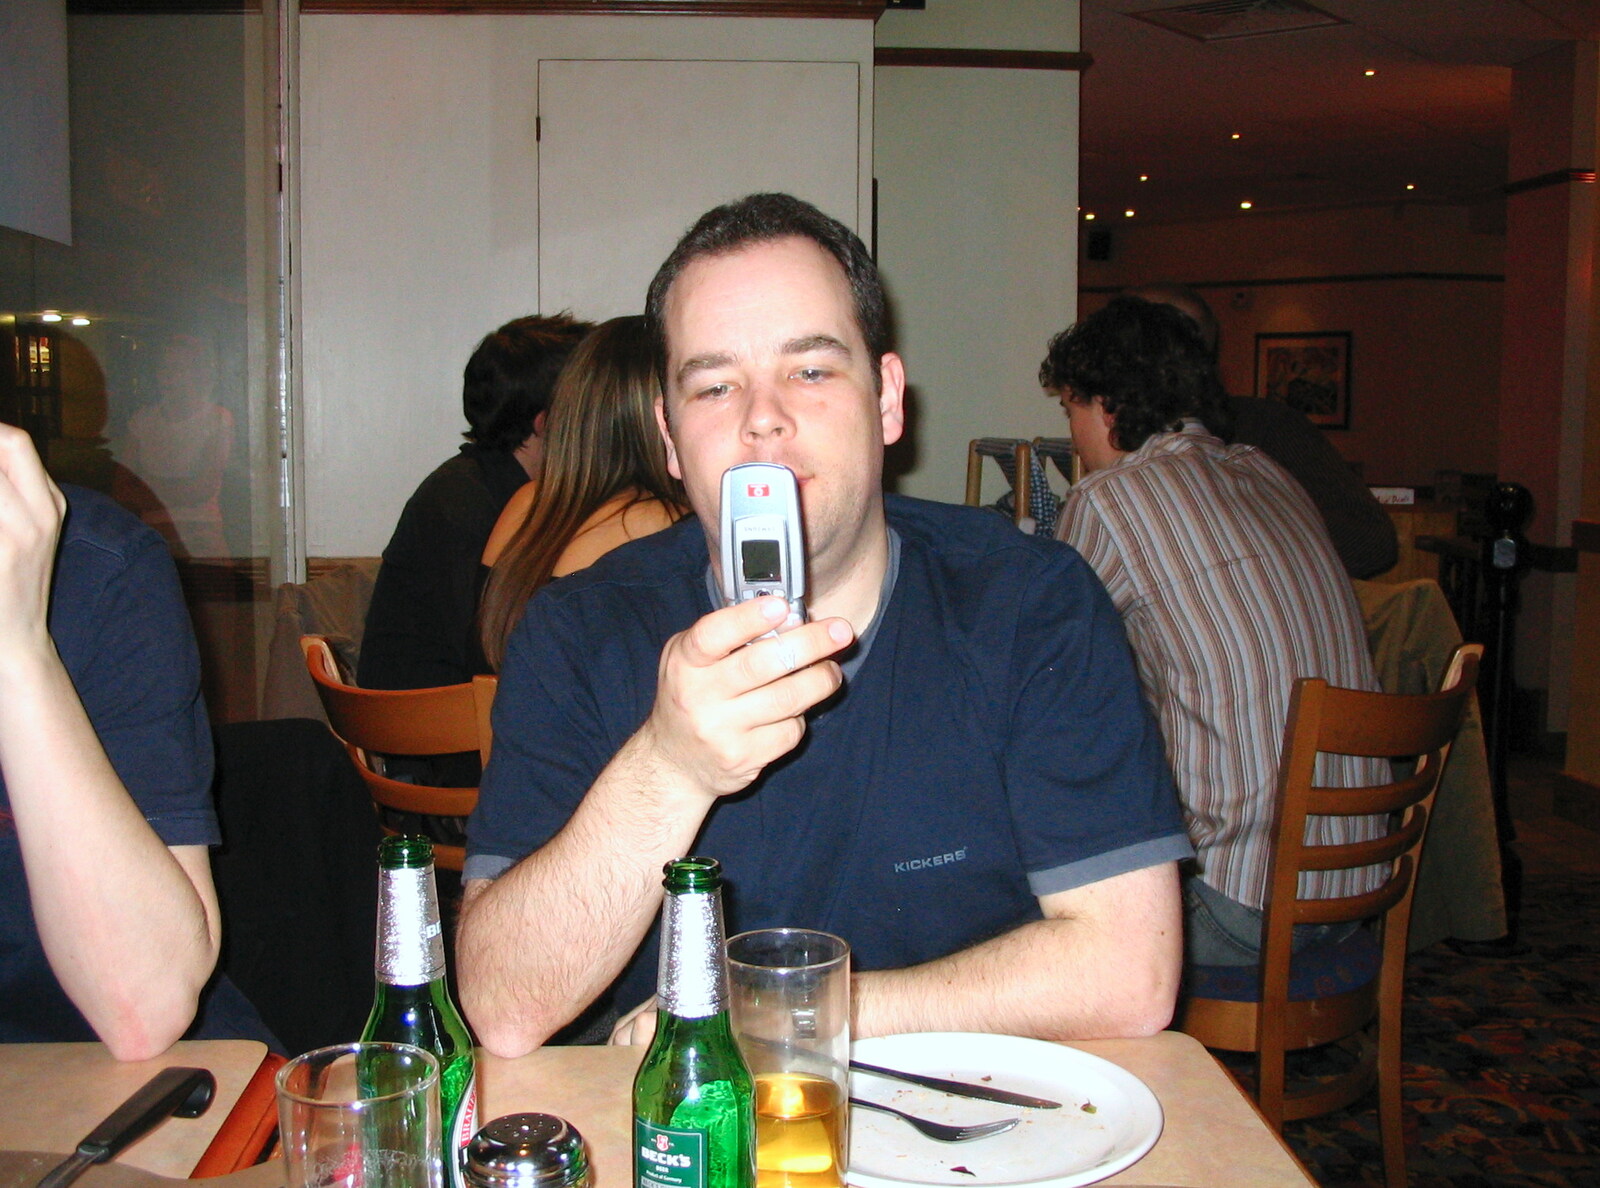 Russell checks his phone out in Pizza Hut, Ipswich from The SCC Social Club and the  Demolition of Diss Publishing, Ipswich and Diss - 2nd April 2005